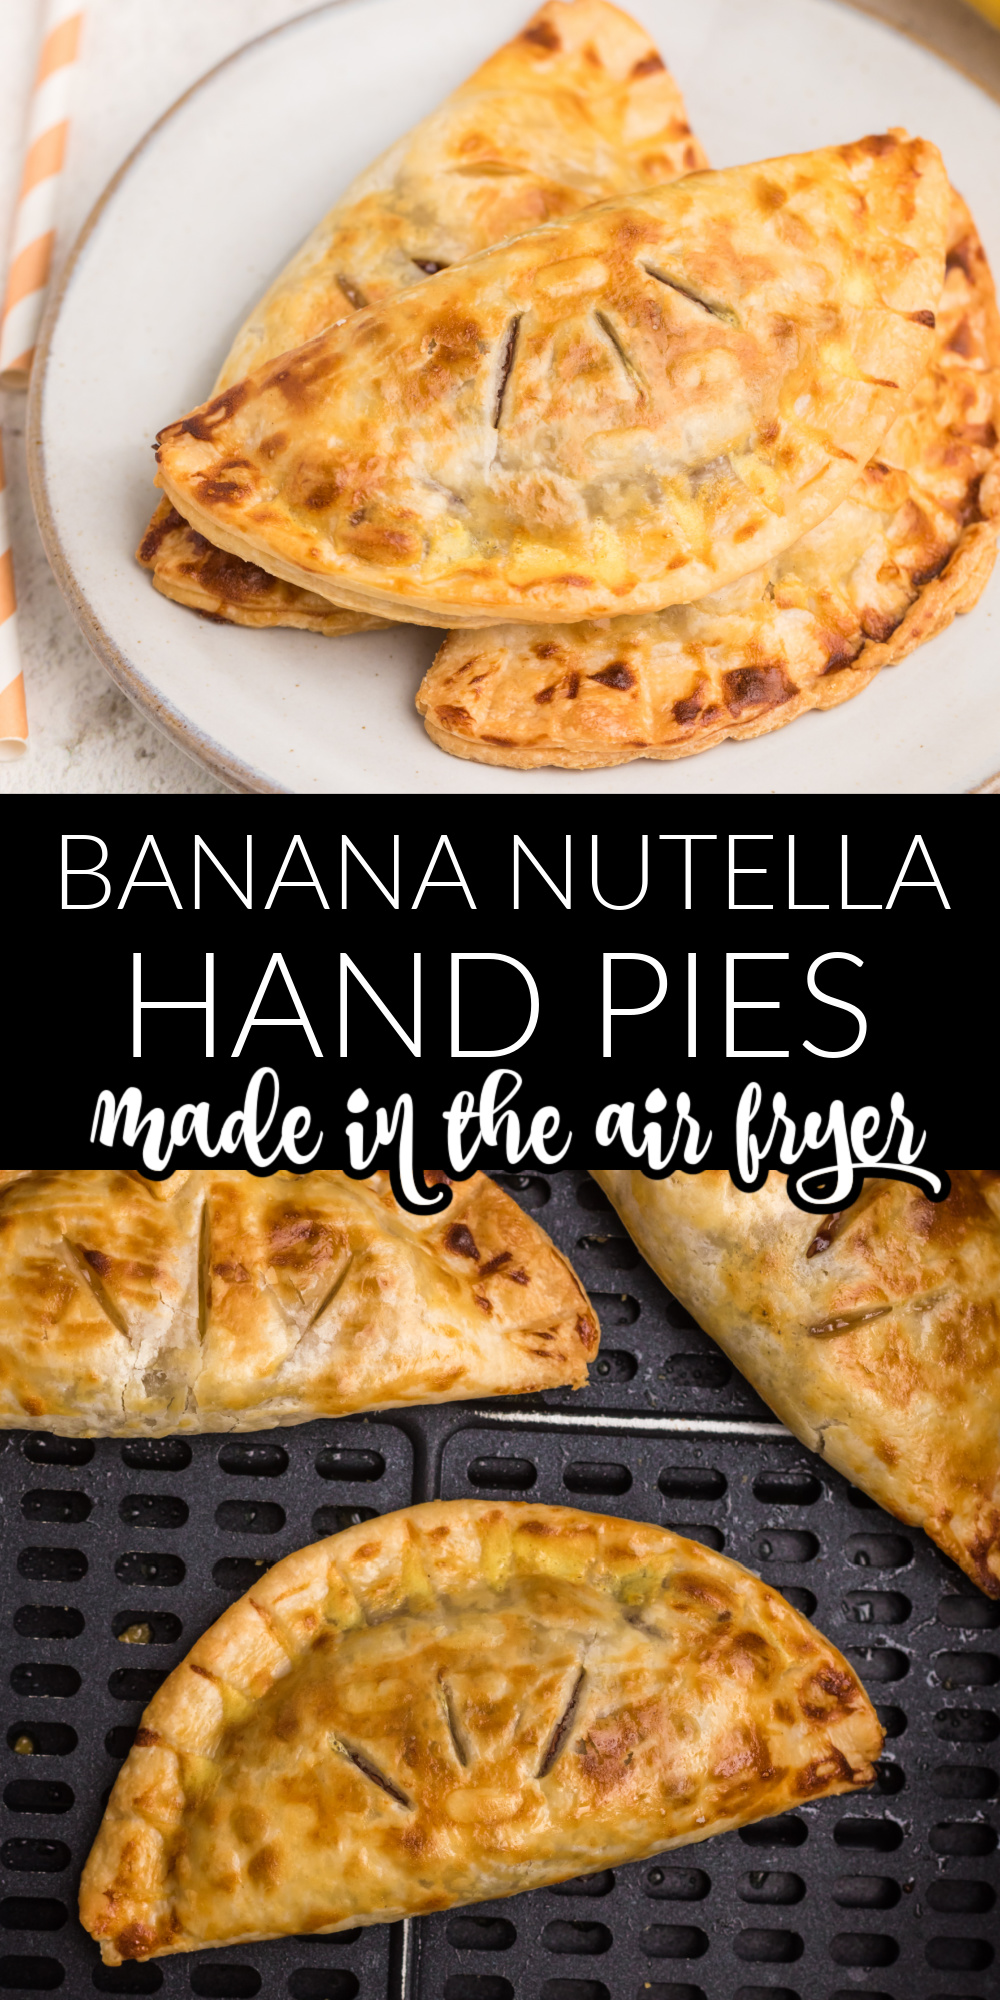 Air Fryer Banana Nutella Hand Pies are a delicious dessert that the whole family enjoys. Made with freshly sliced banana, Nutella hazelnut spread, and a few simple ingredients.